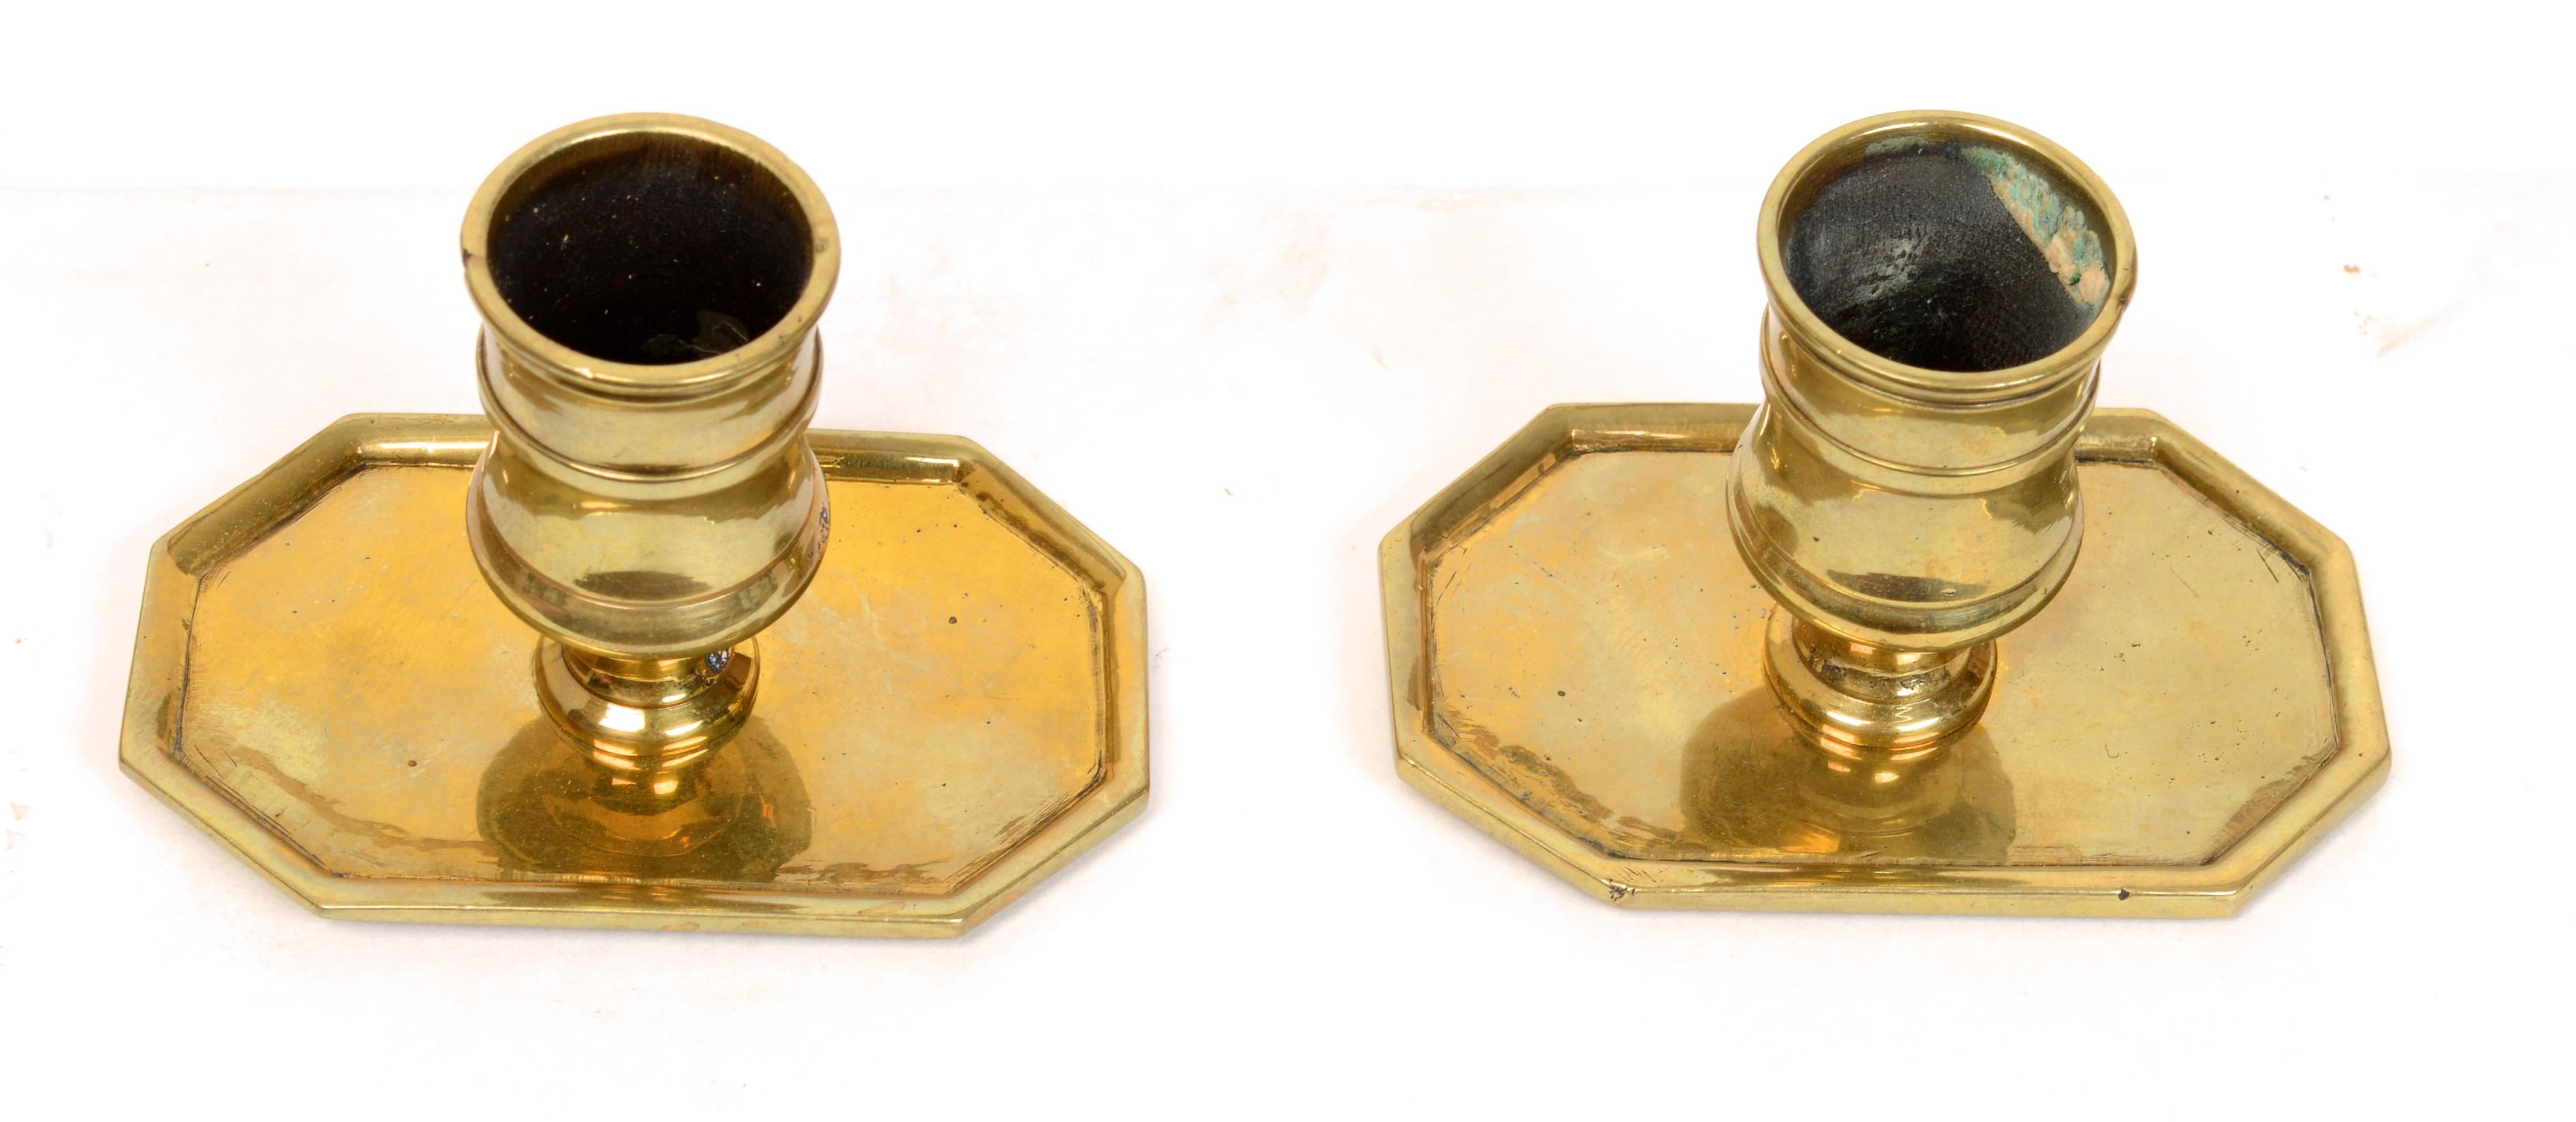 Pair of French brass tric trac game table candlesticks, Louis XVI c1780. Traditional construction with a peg which was inserted into a conforming hole on the table playing surface when the top was removed. Tric Trac candlesticks are hard to find,